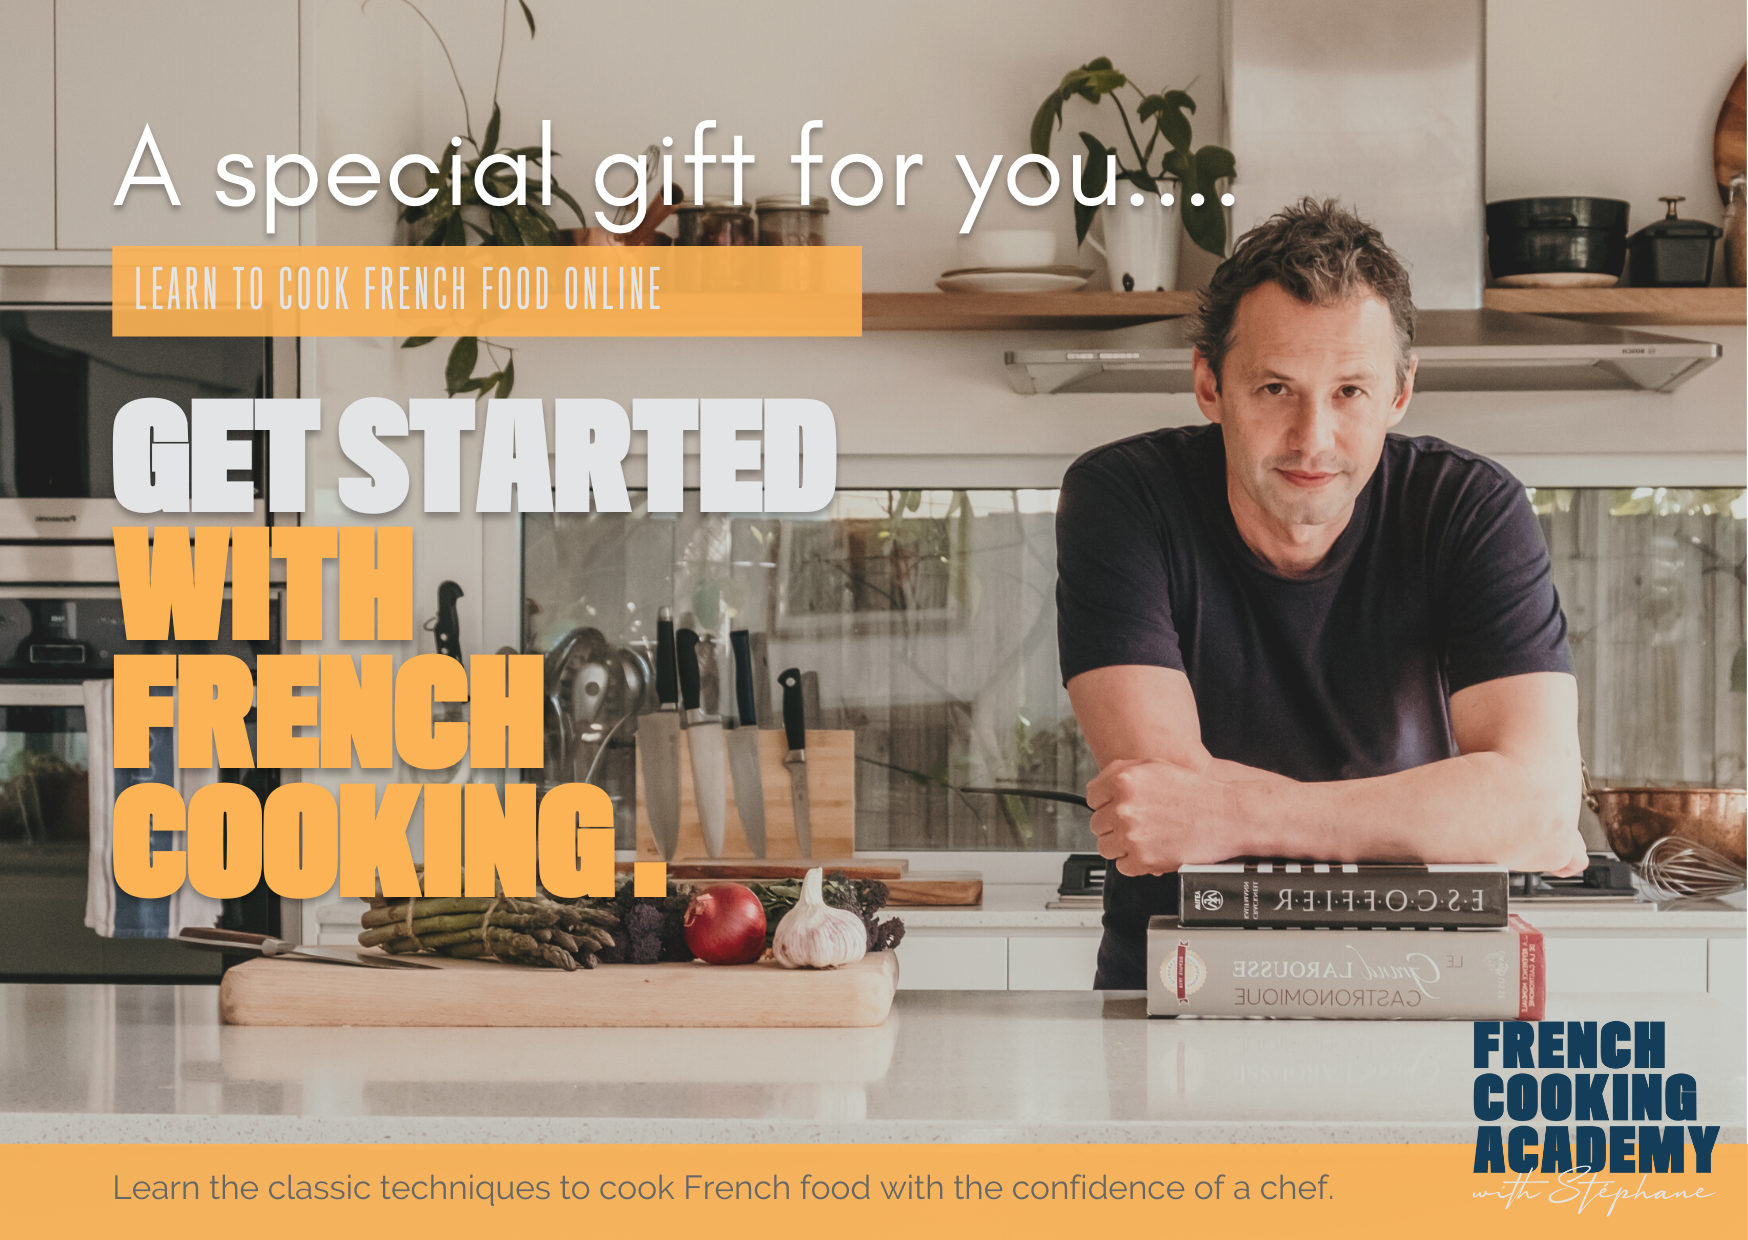 French cooking academy gift cards